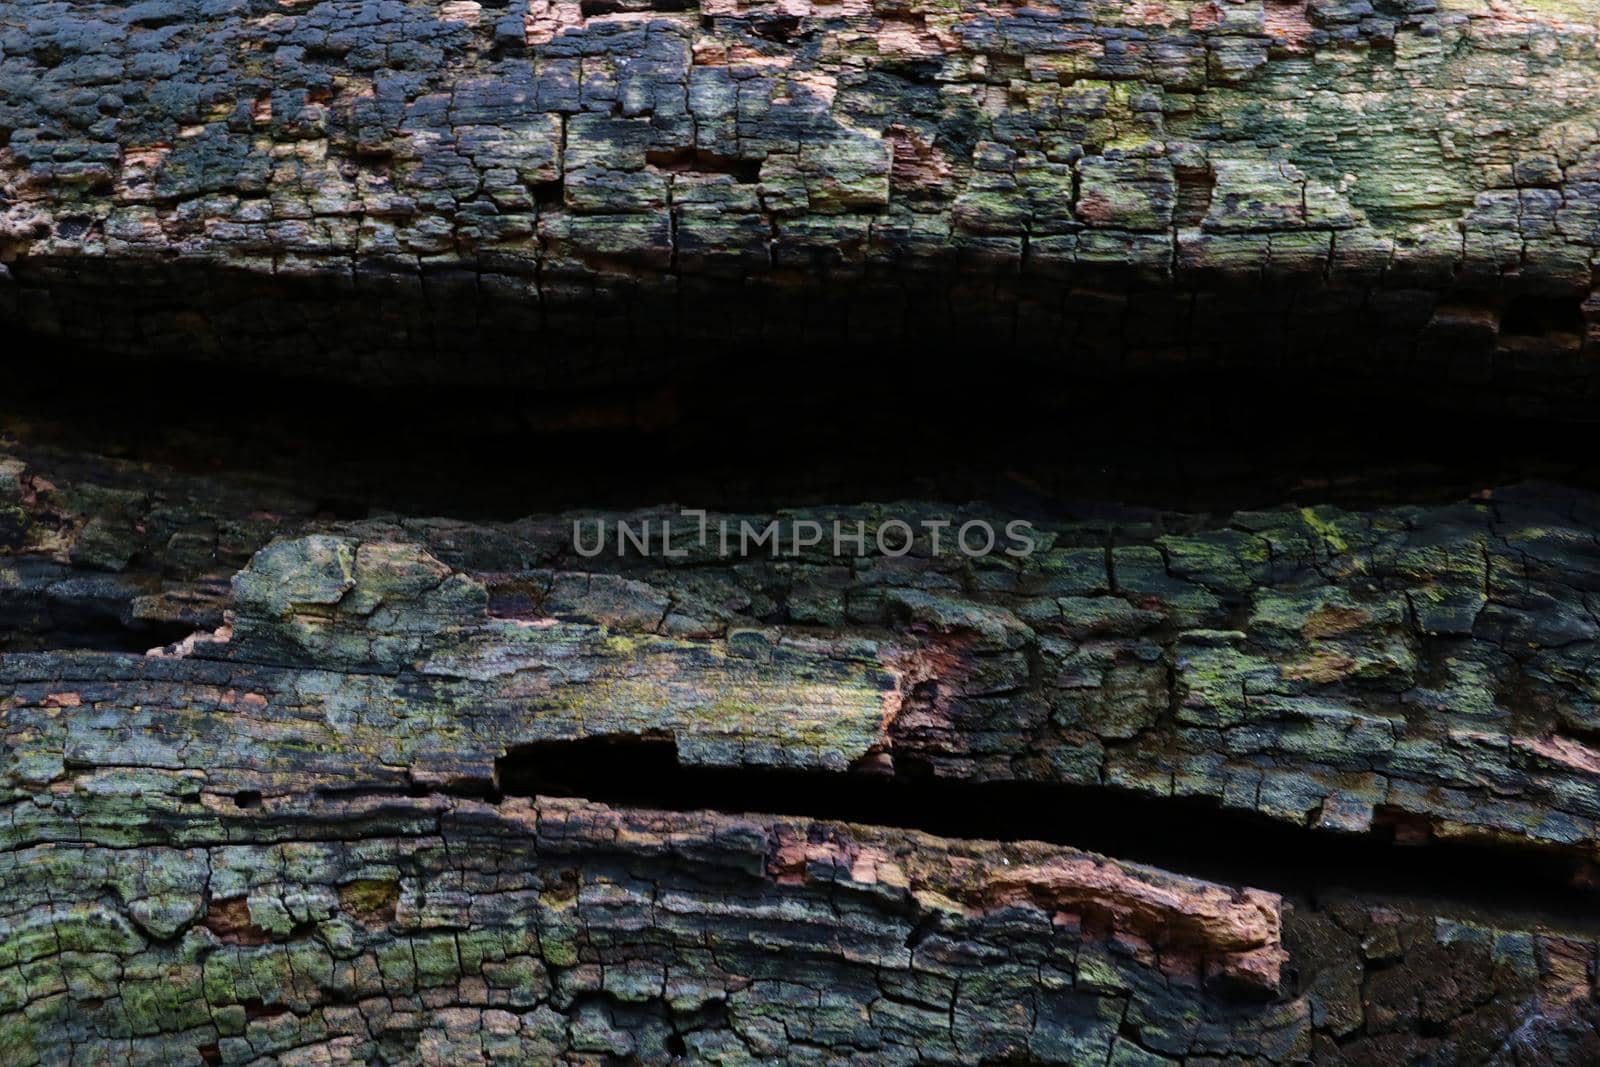 Close-up of old wood, wood texture, background